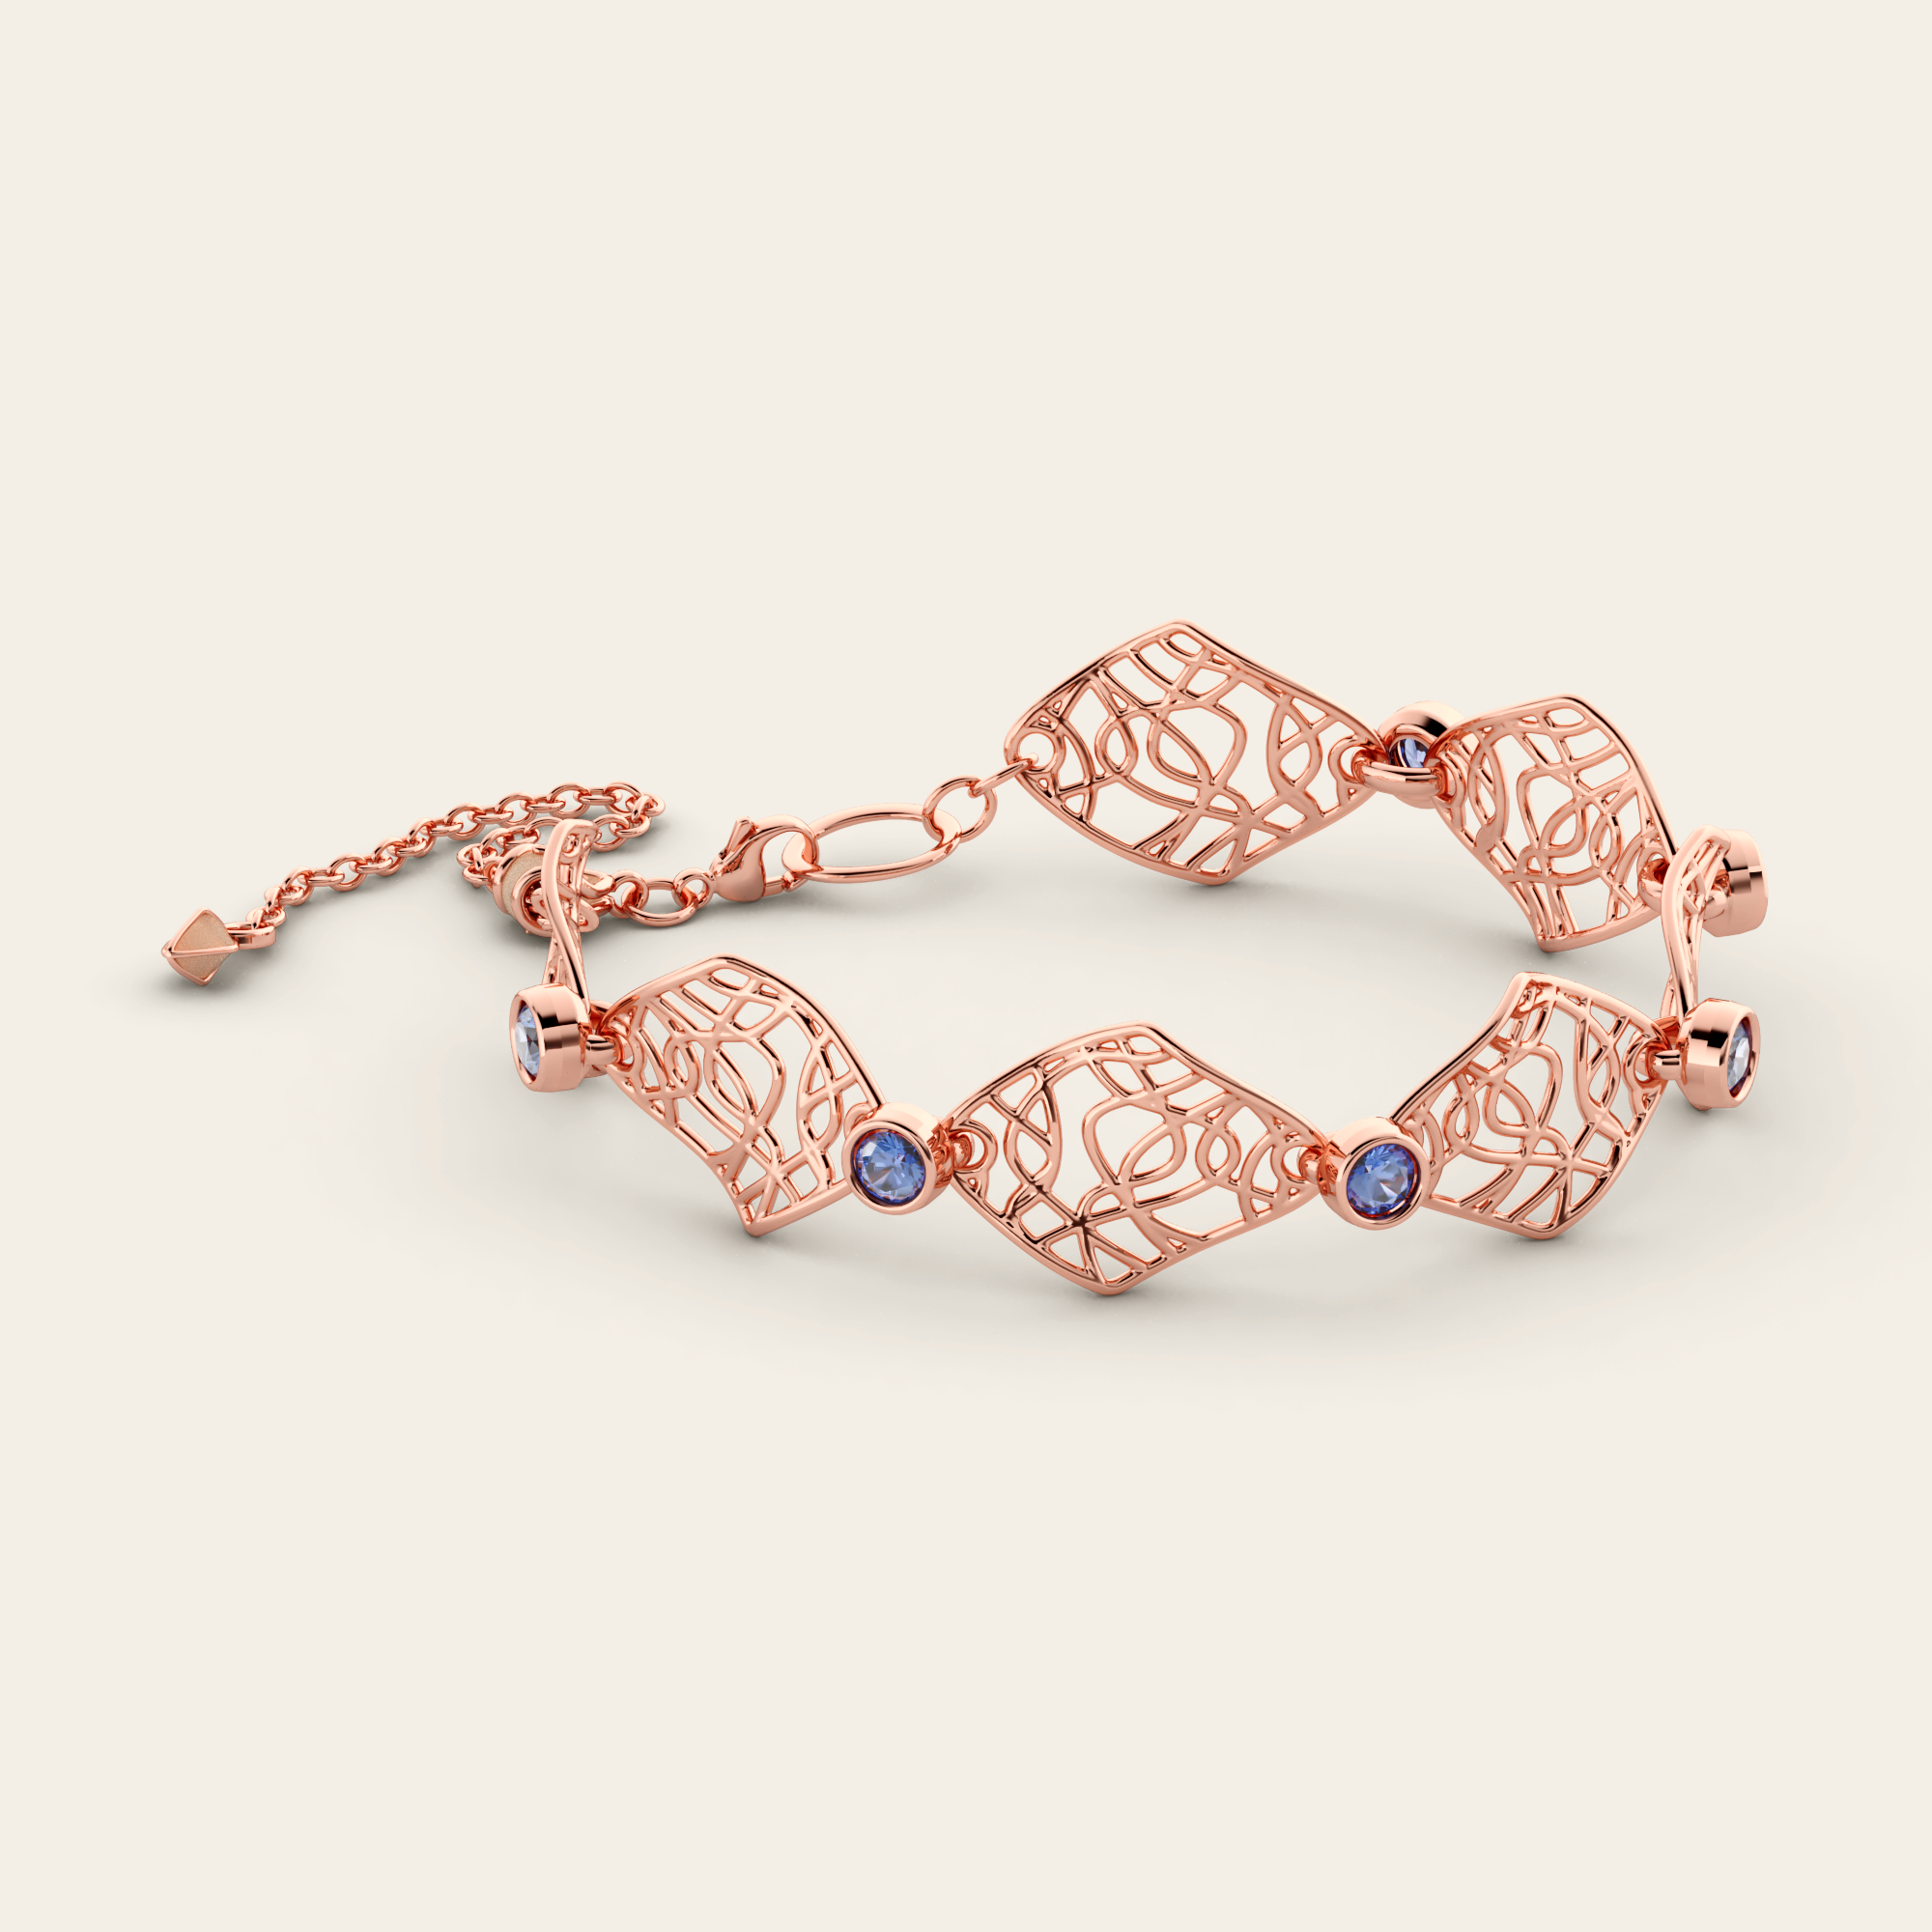 Cascade Linked Bracelet with Purple/Blue Sapphires in 18k Rose Gold